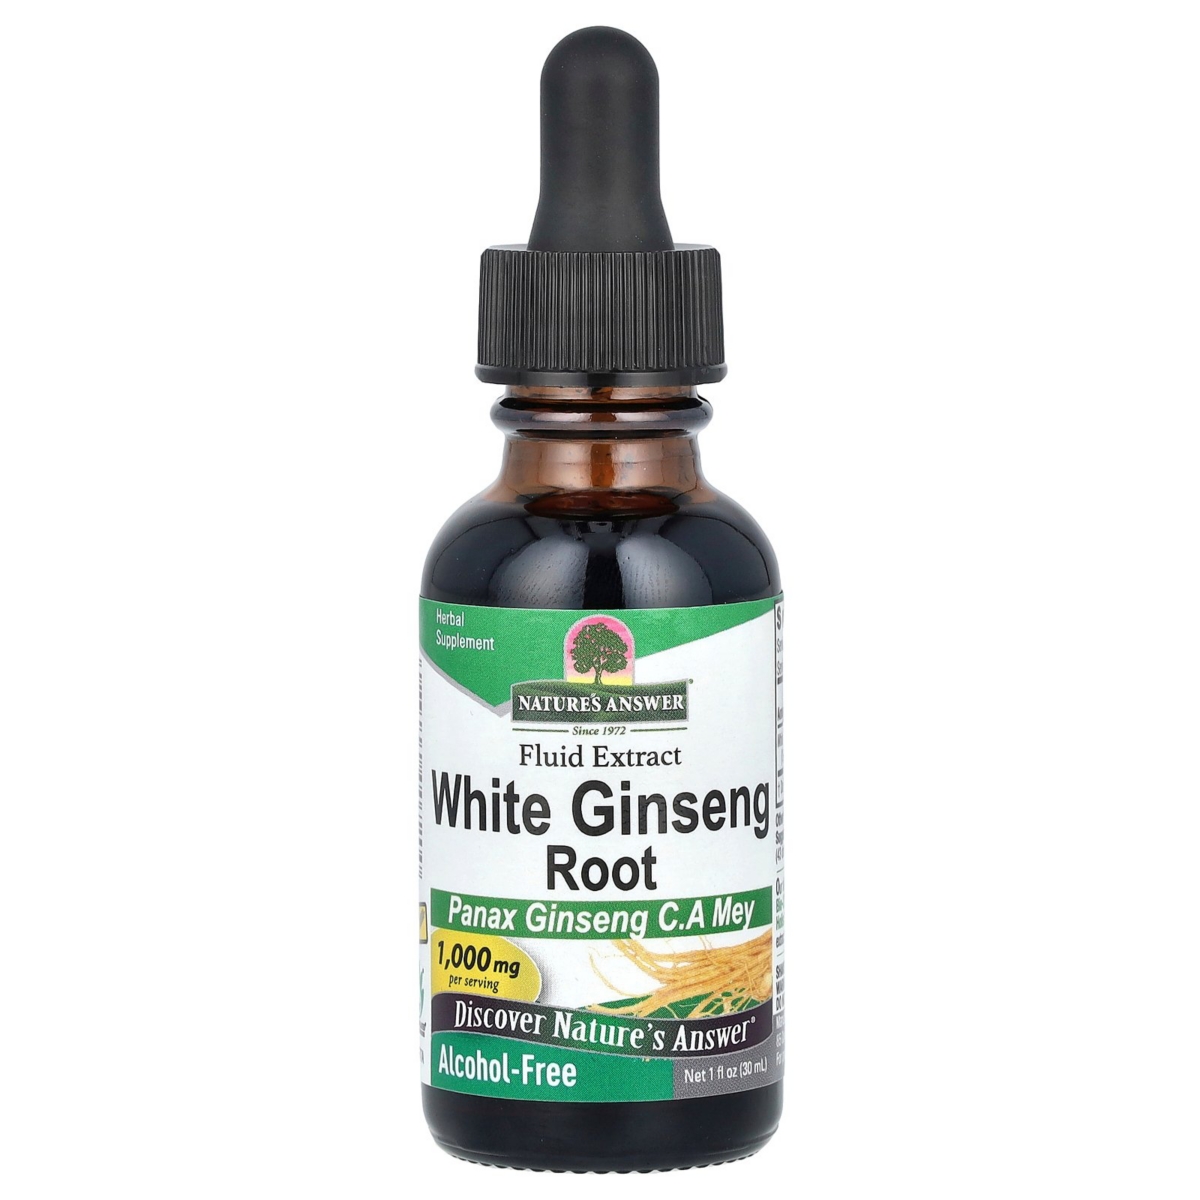 White Ginseng Root Fluid Extract Alcohol-Free 1 000 mg - 1 fl oz (30 ml) - Assorted Pre-pack (See Table